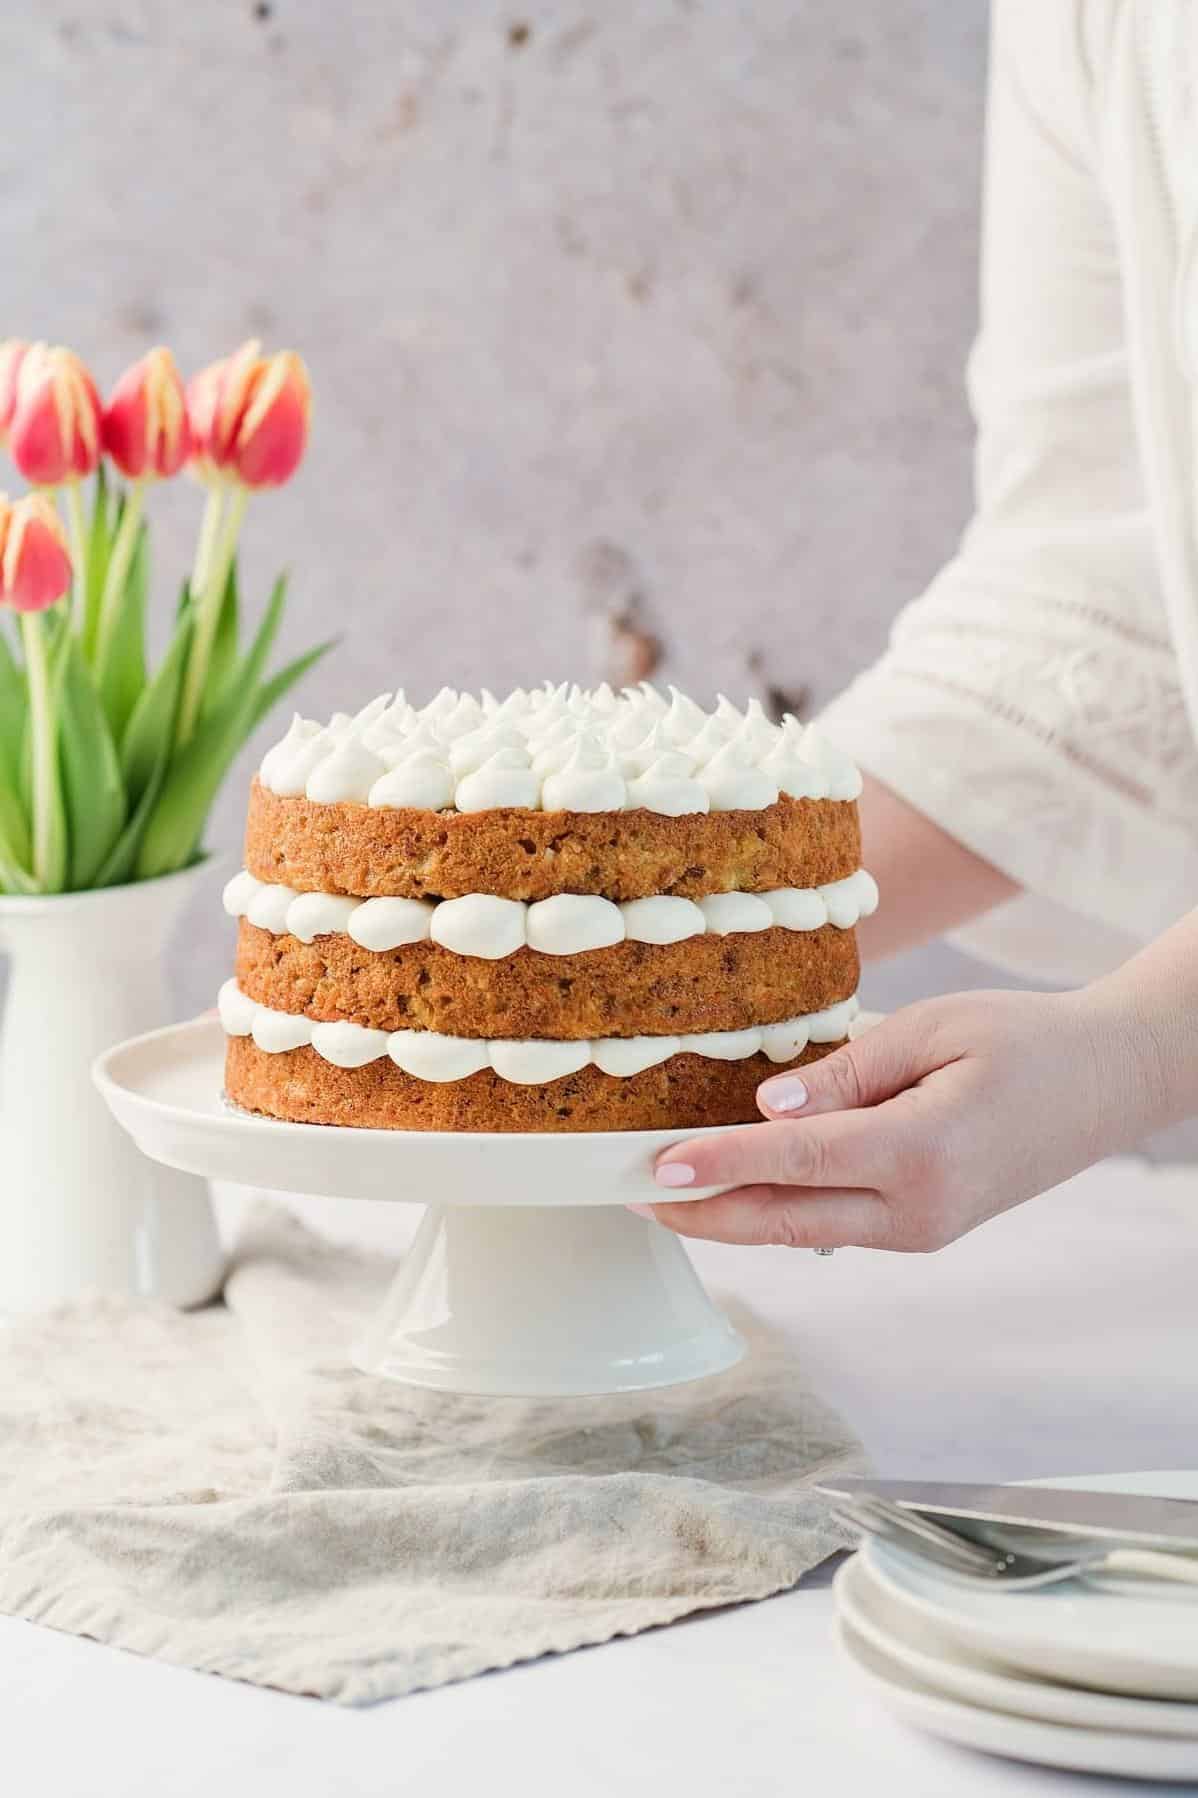  The aroma of freshly baked carrot cake fills the kitchen.